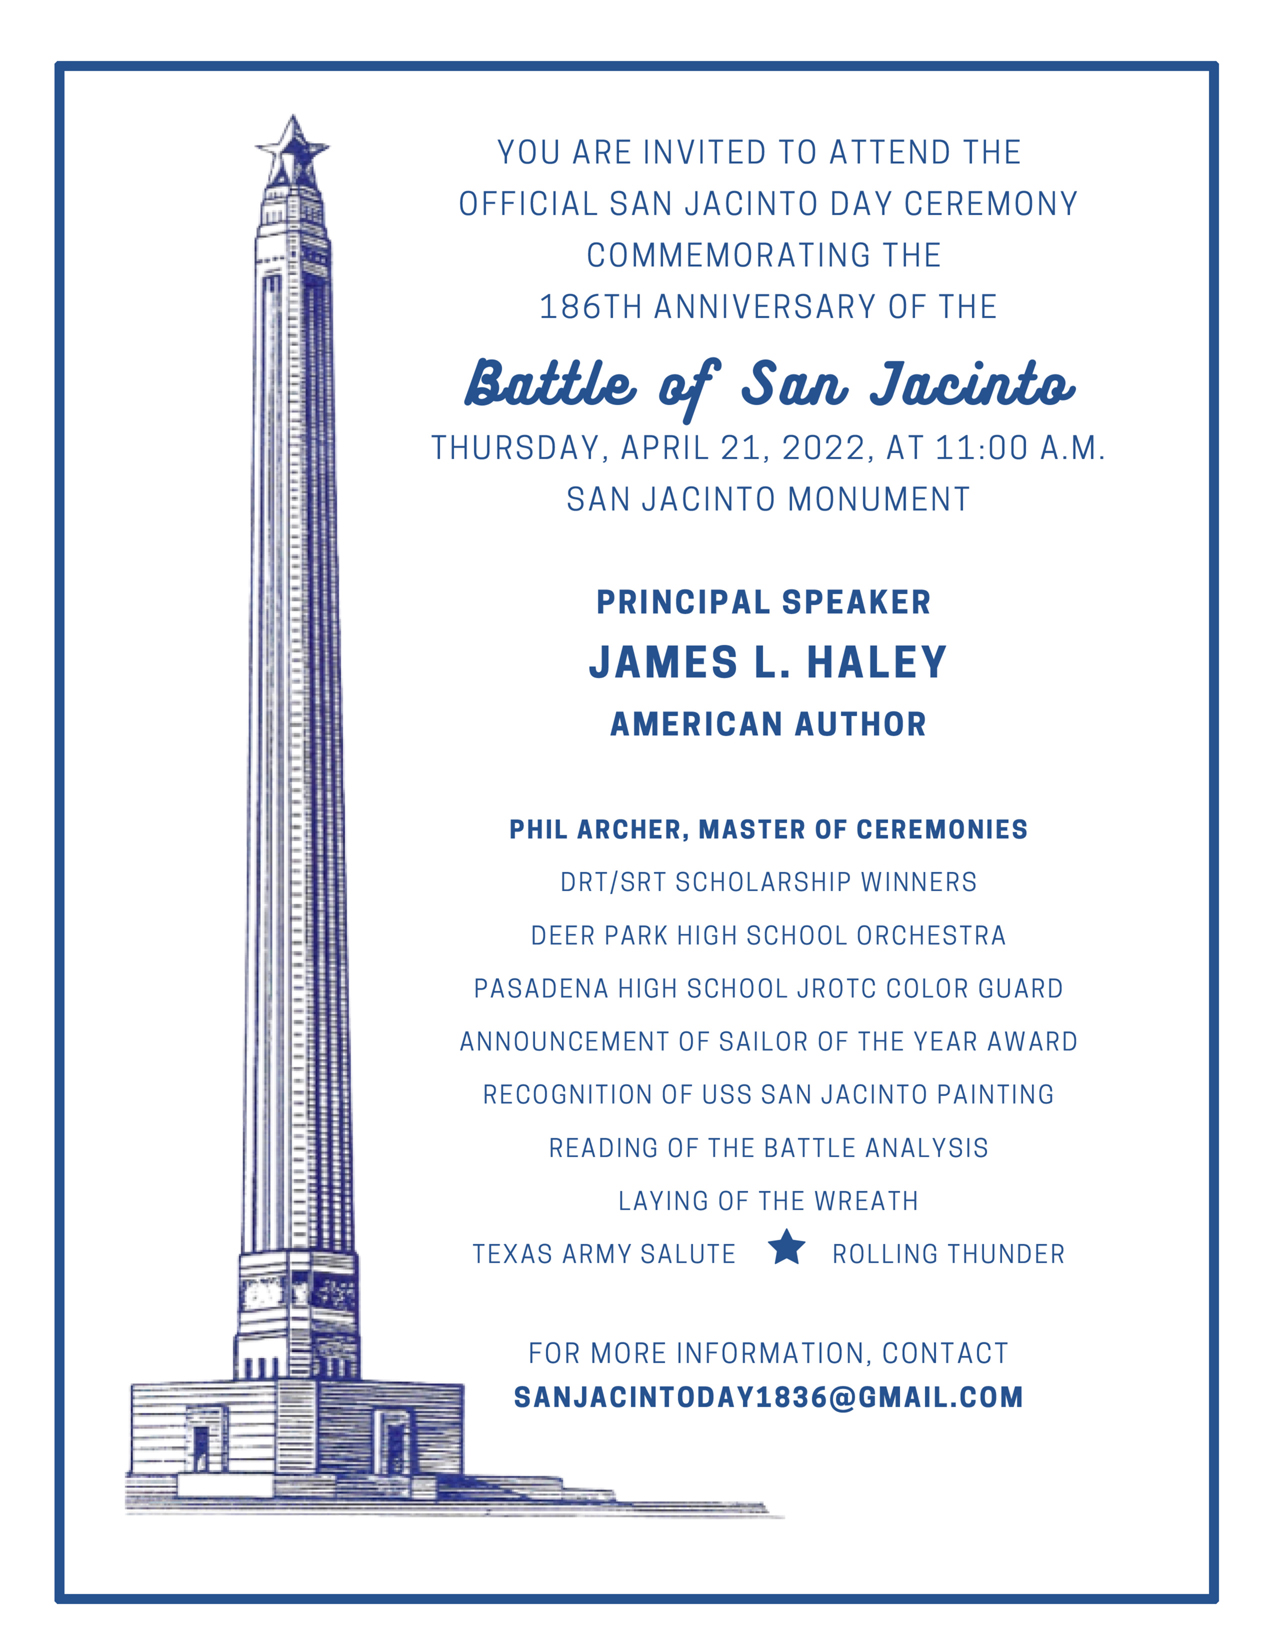 Line drawing of the San Jacinto Monument, with information about an April 21, 2022, event